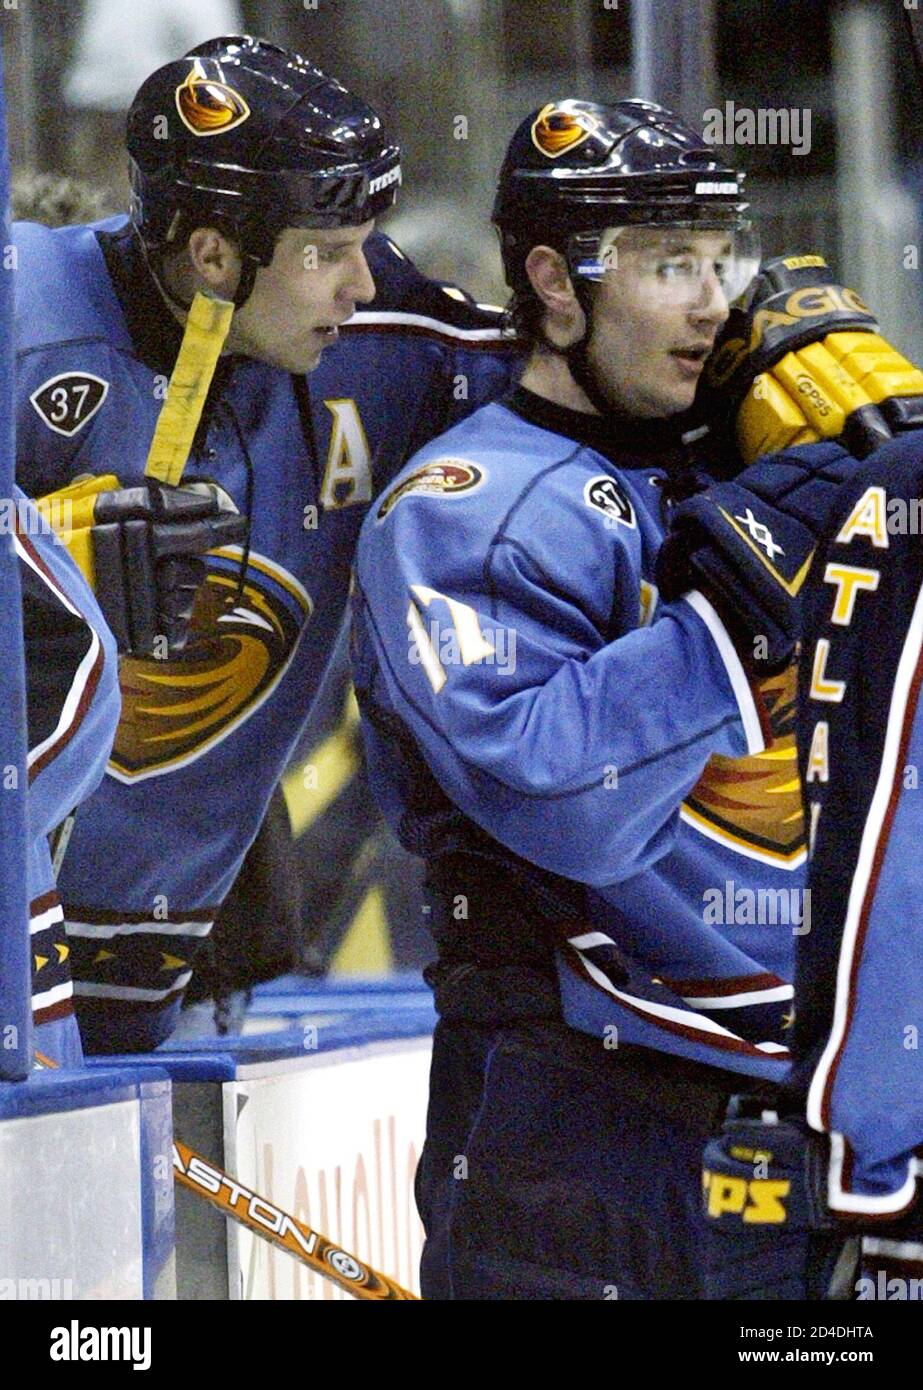 Atlanta Thrashers left wing Ilya Kovalchuk (R) is hugged by teammate Dany  Heatley (L) after their win over the New York Rangers in Atlanta February  29, 2004. Kovalchuk had two goals as